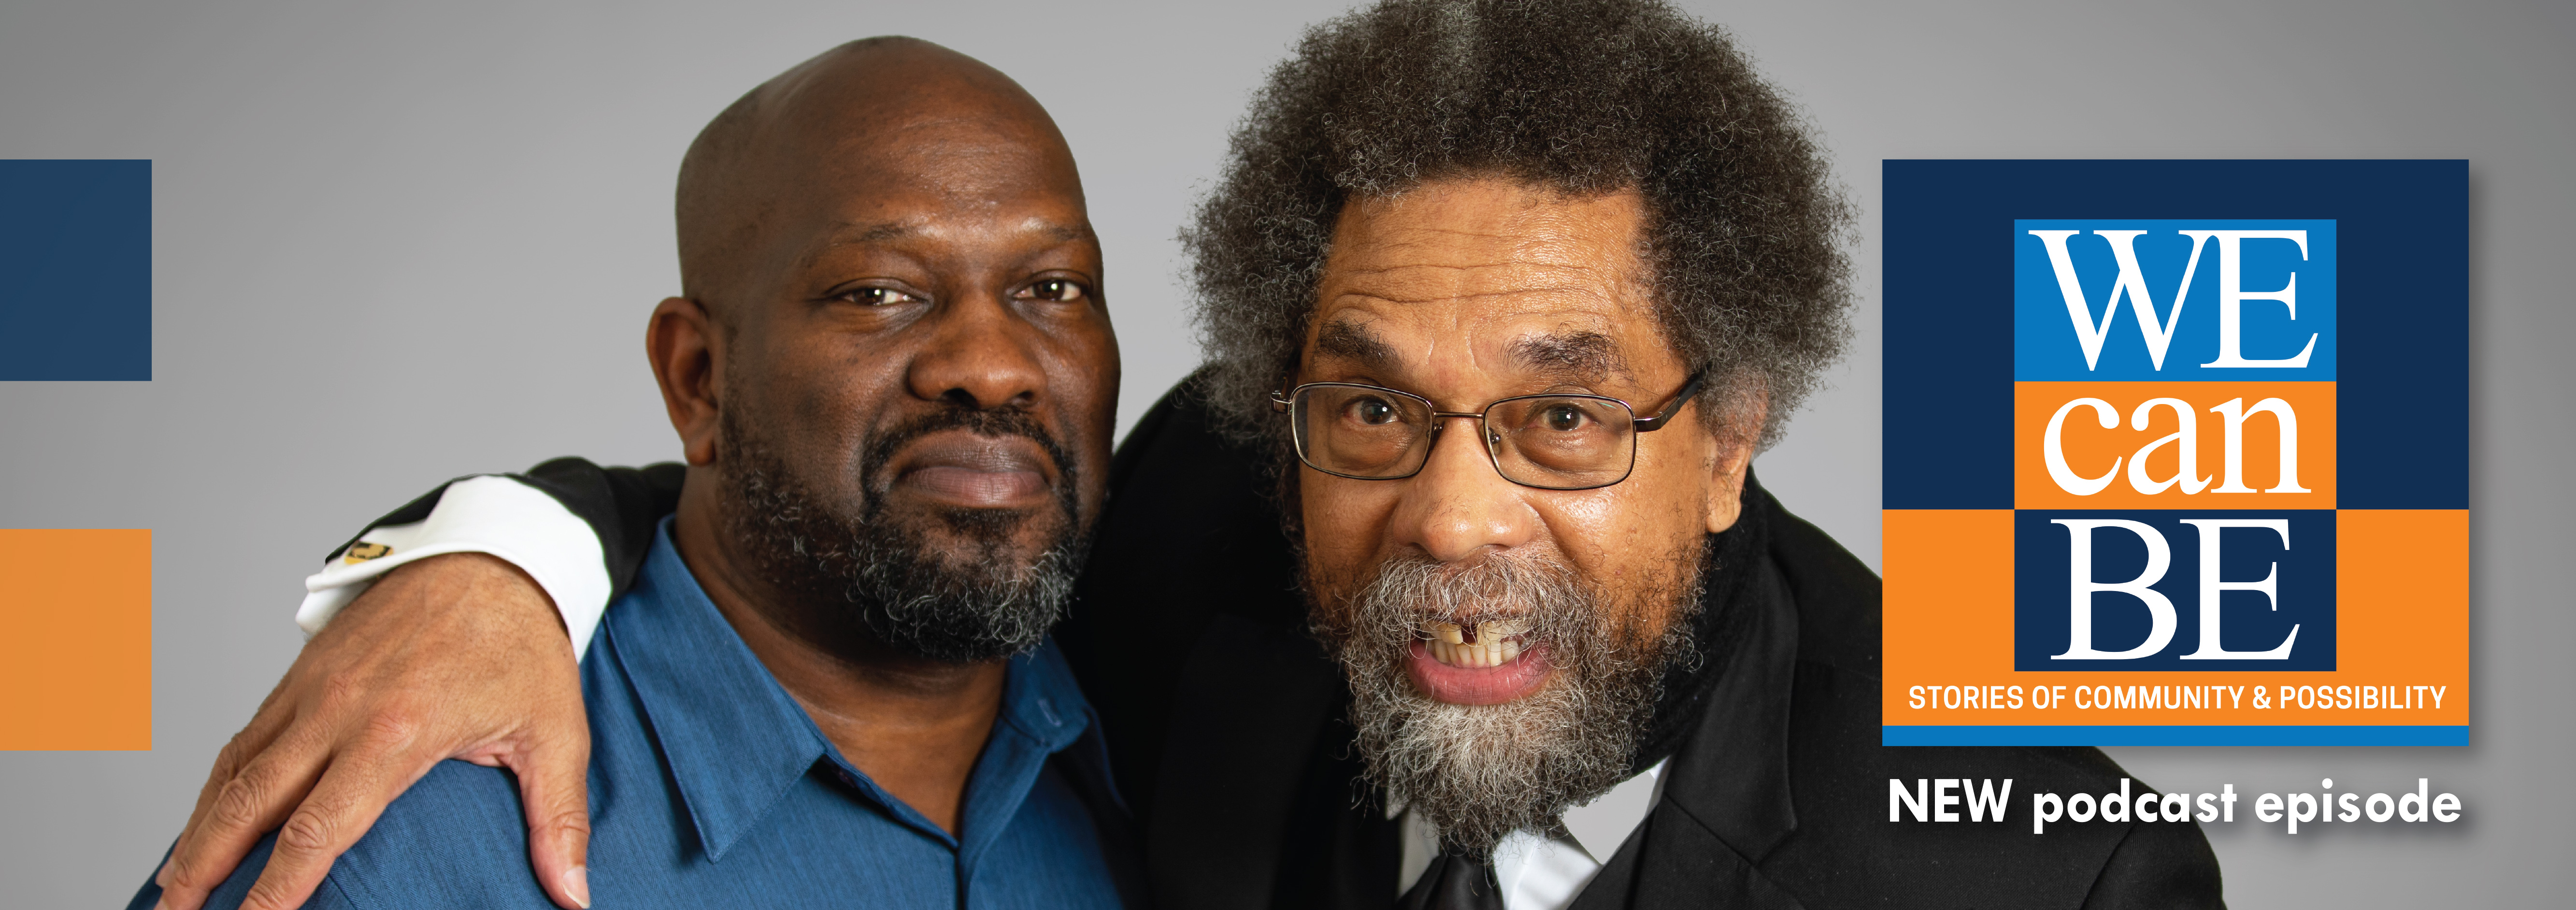 Image of Dr. Cornel West with his arm around the shoulders of Bakari Kitwana